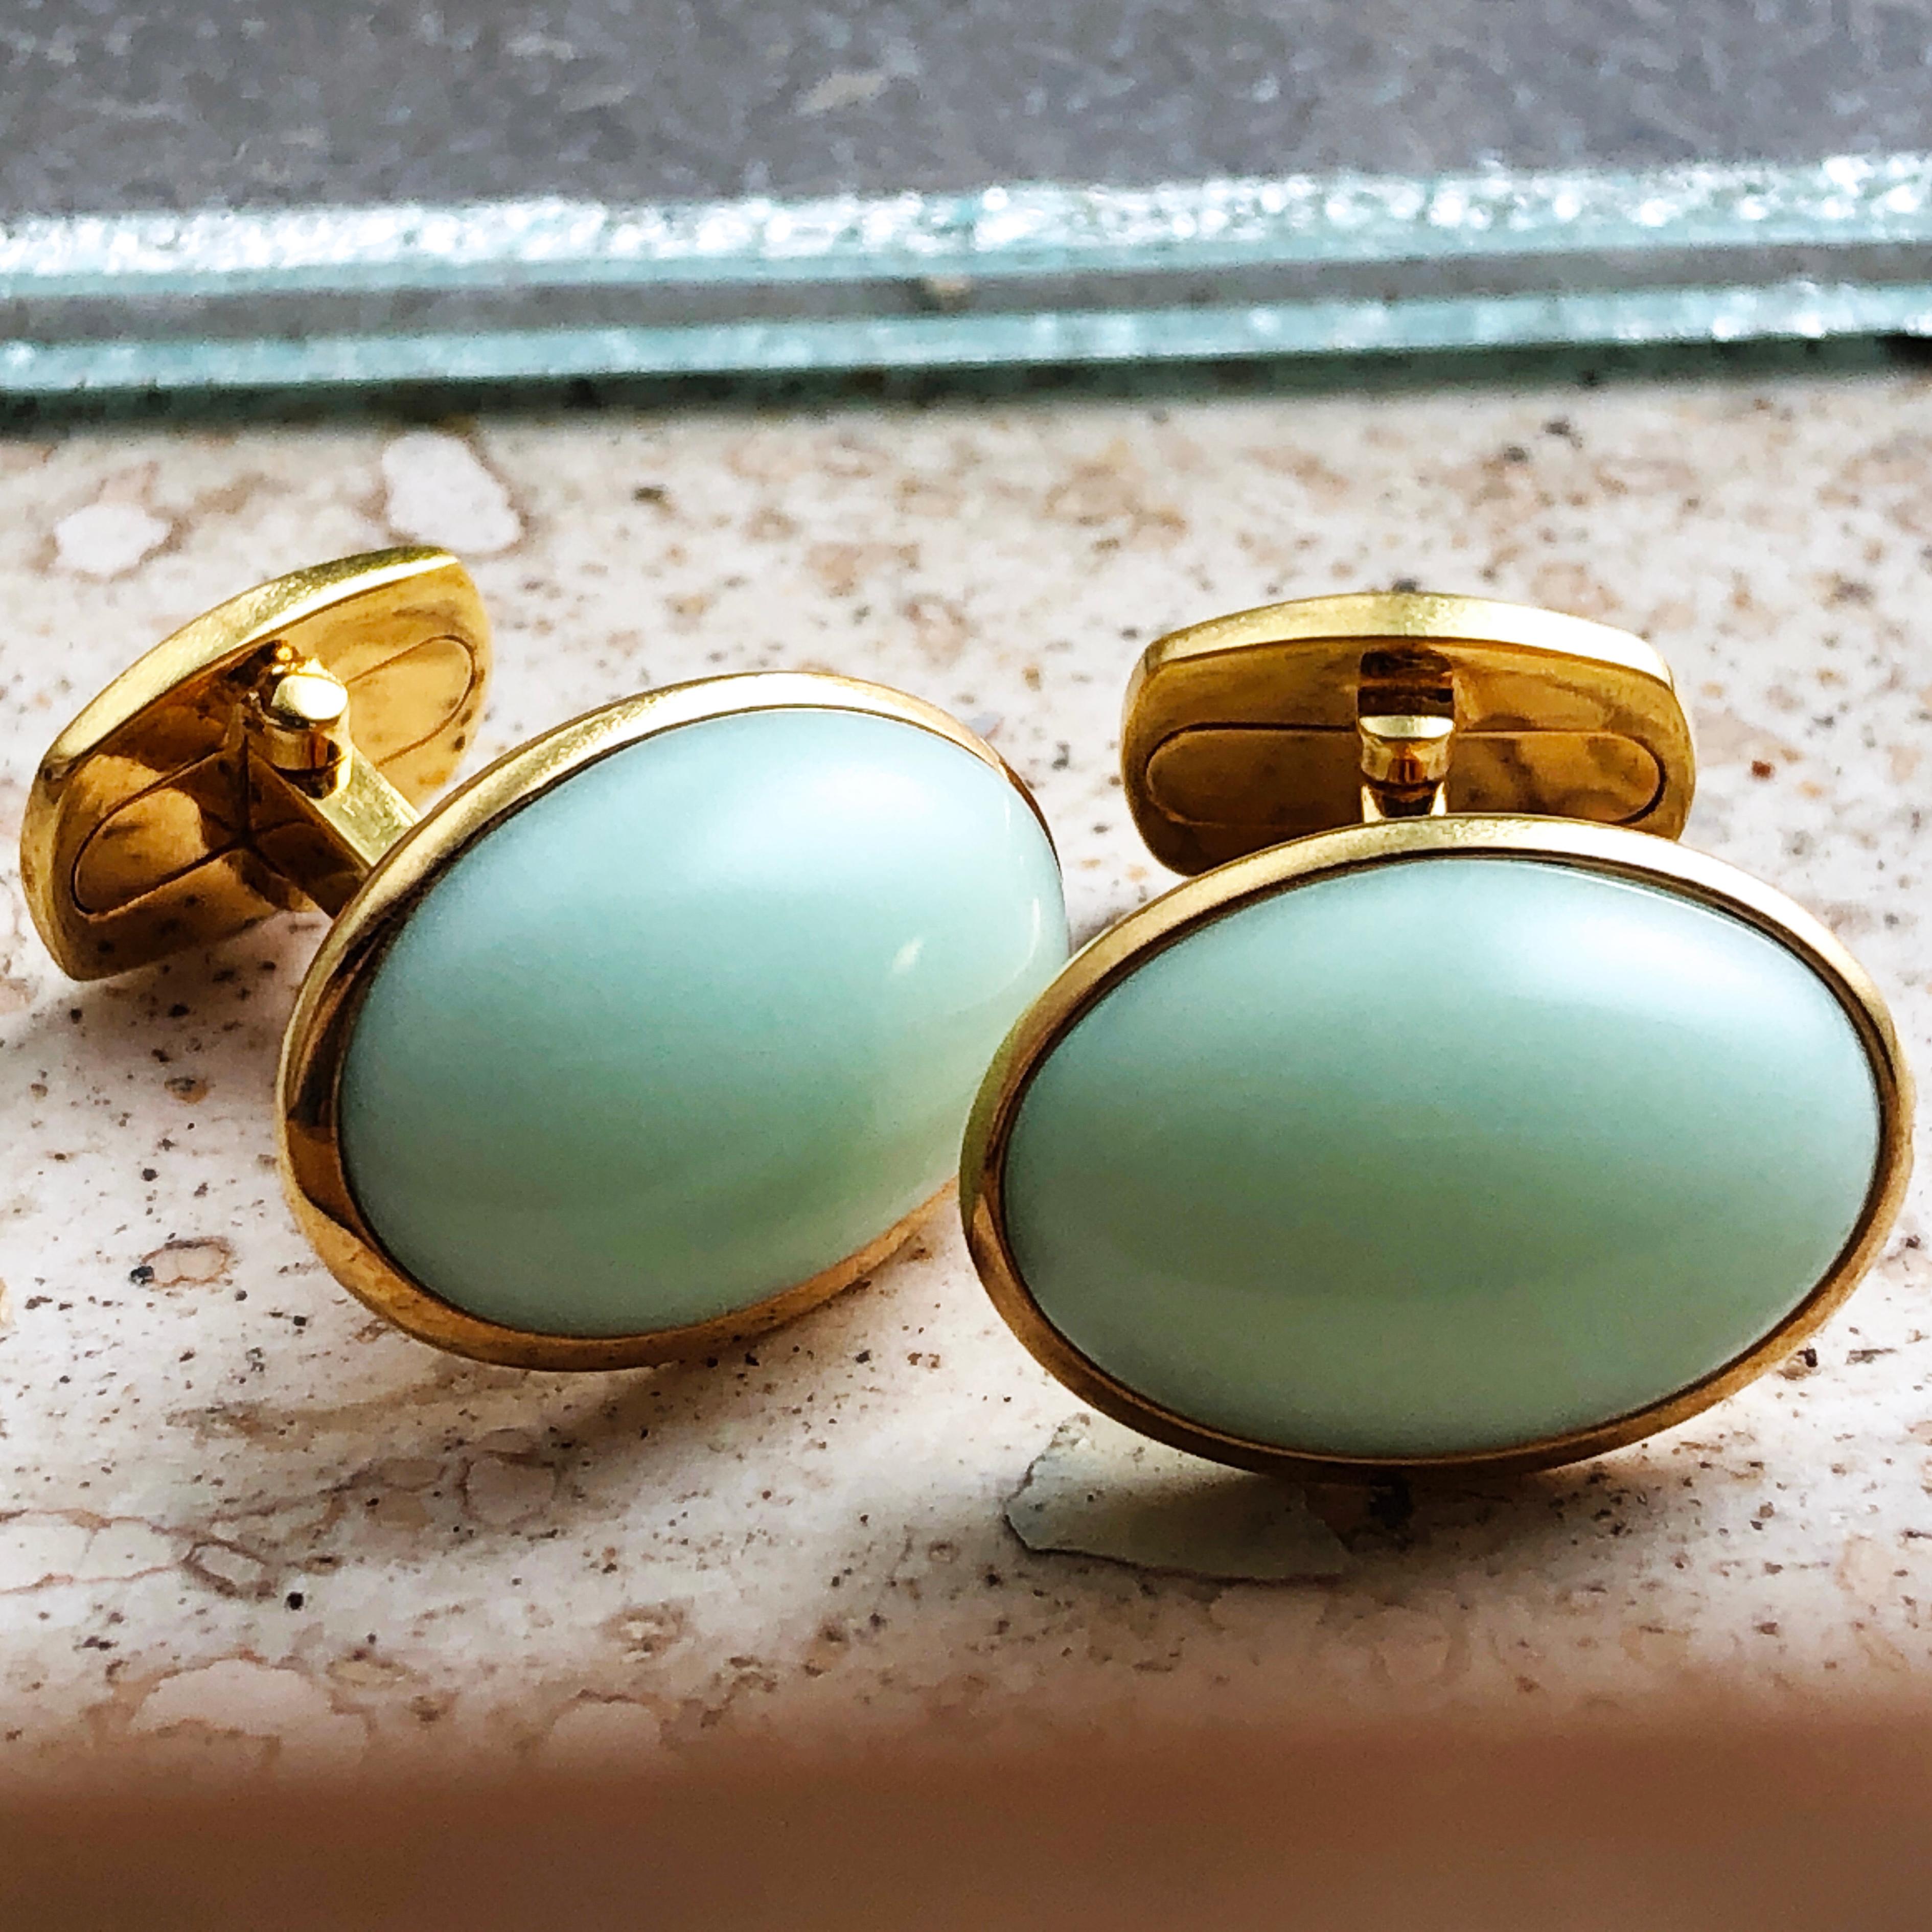 Berca Natural Green Opal Cabochon Sterling Silver Gold-Plated Cufflinks 2